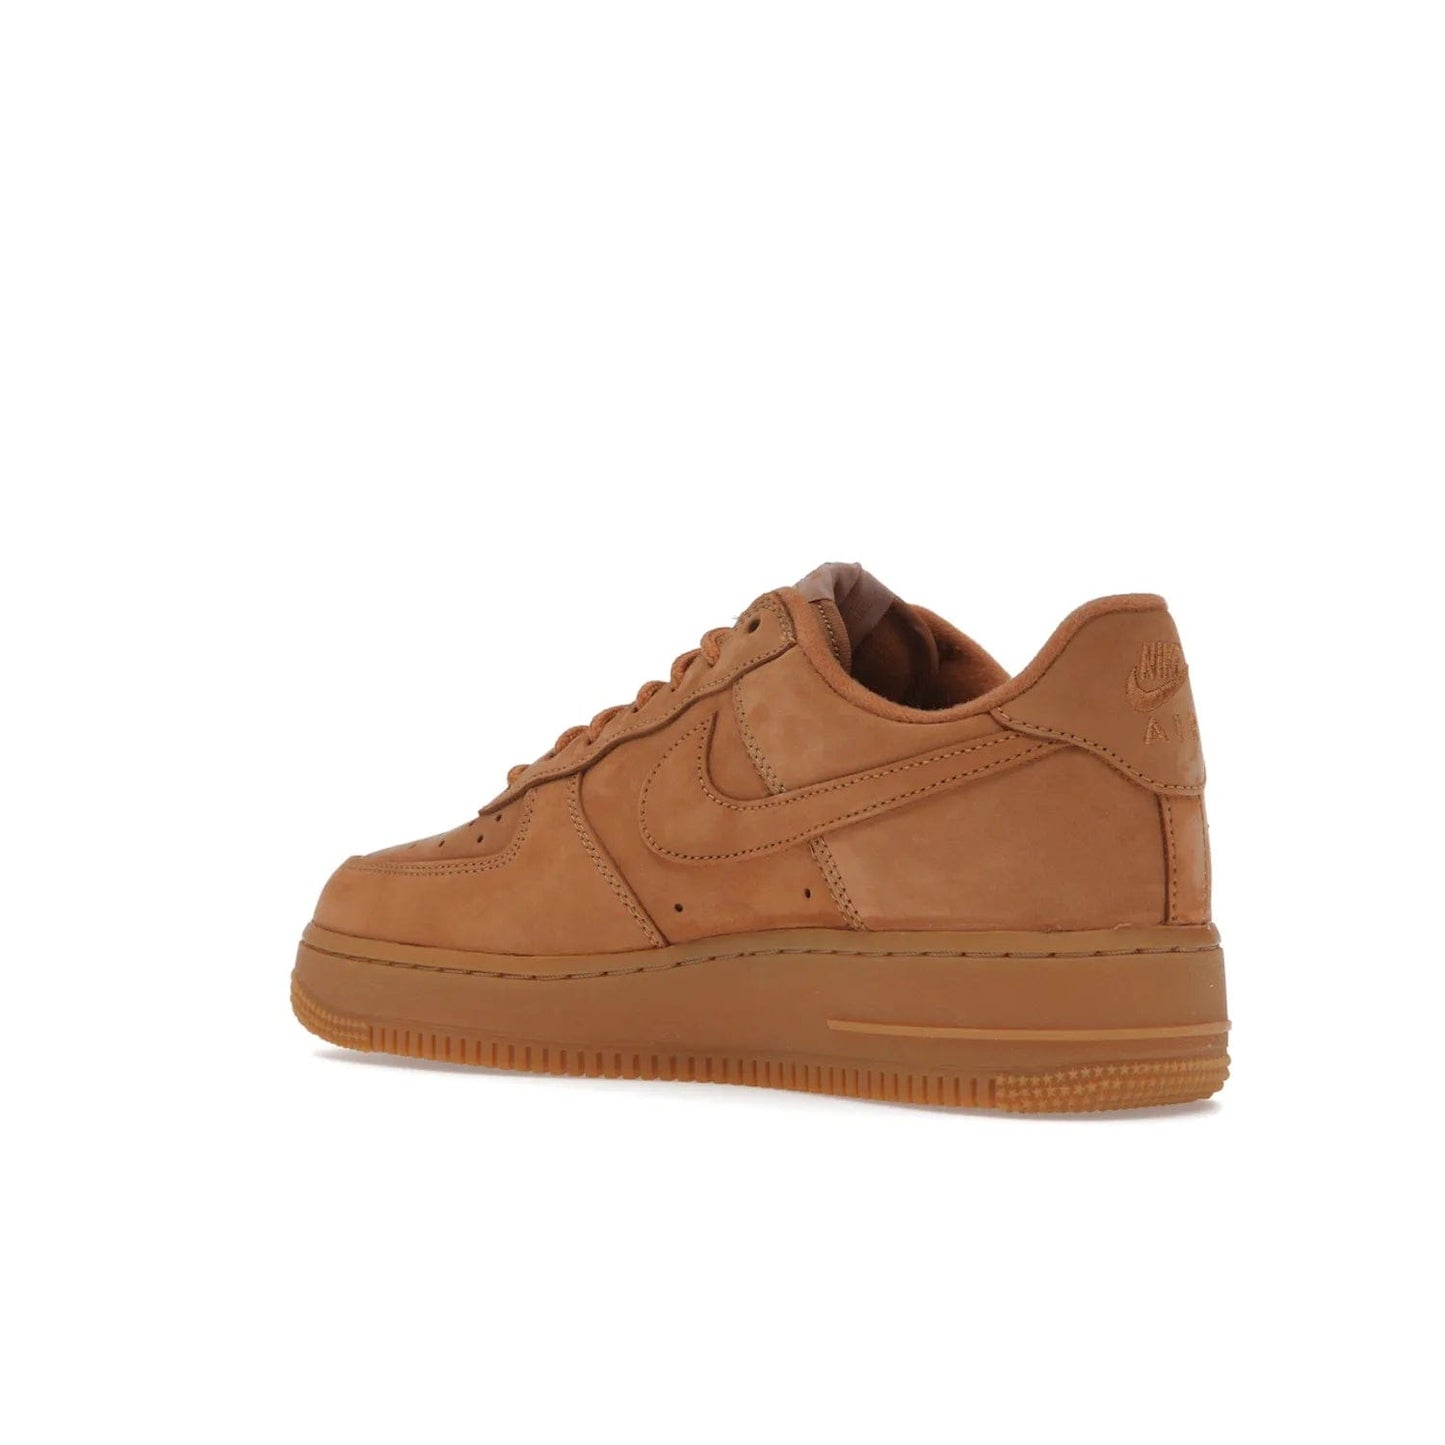 Nike Air Force 1 Low SP Supreme Wheat - Image 23 - Only at www.BallersClubKickz.com - A luxe Flax Durabuck upper and Supreme Box Logo insignias on the lateral heels make the Nike Air Force 1 Low SP Supreme Wheat a stylish lifestyle shoe. Matching Flax Air sole adds a classic touch to this collaboration between Nike and Supreme. Make a statement with this edition of the classic Air Force 1 Low.